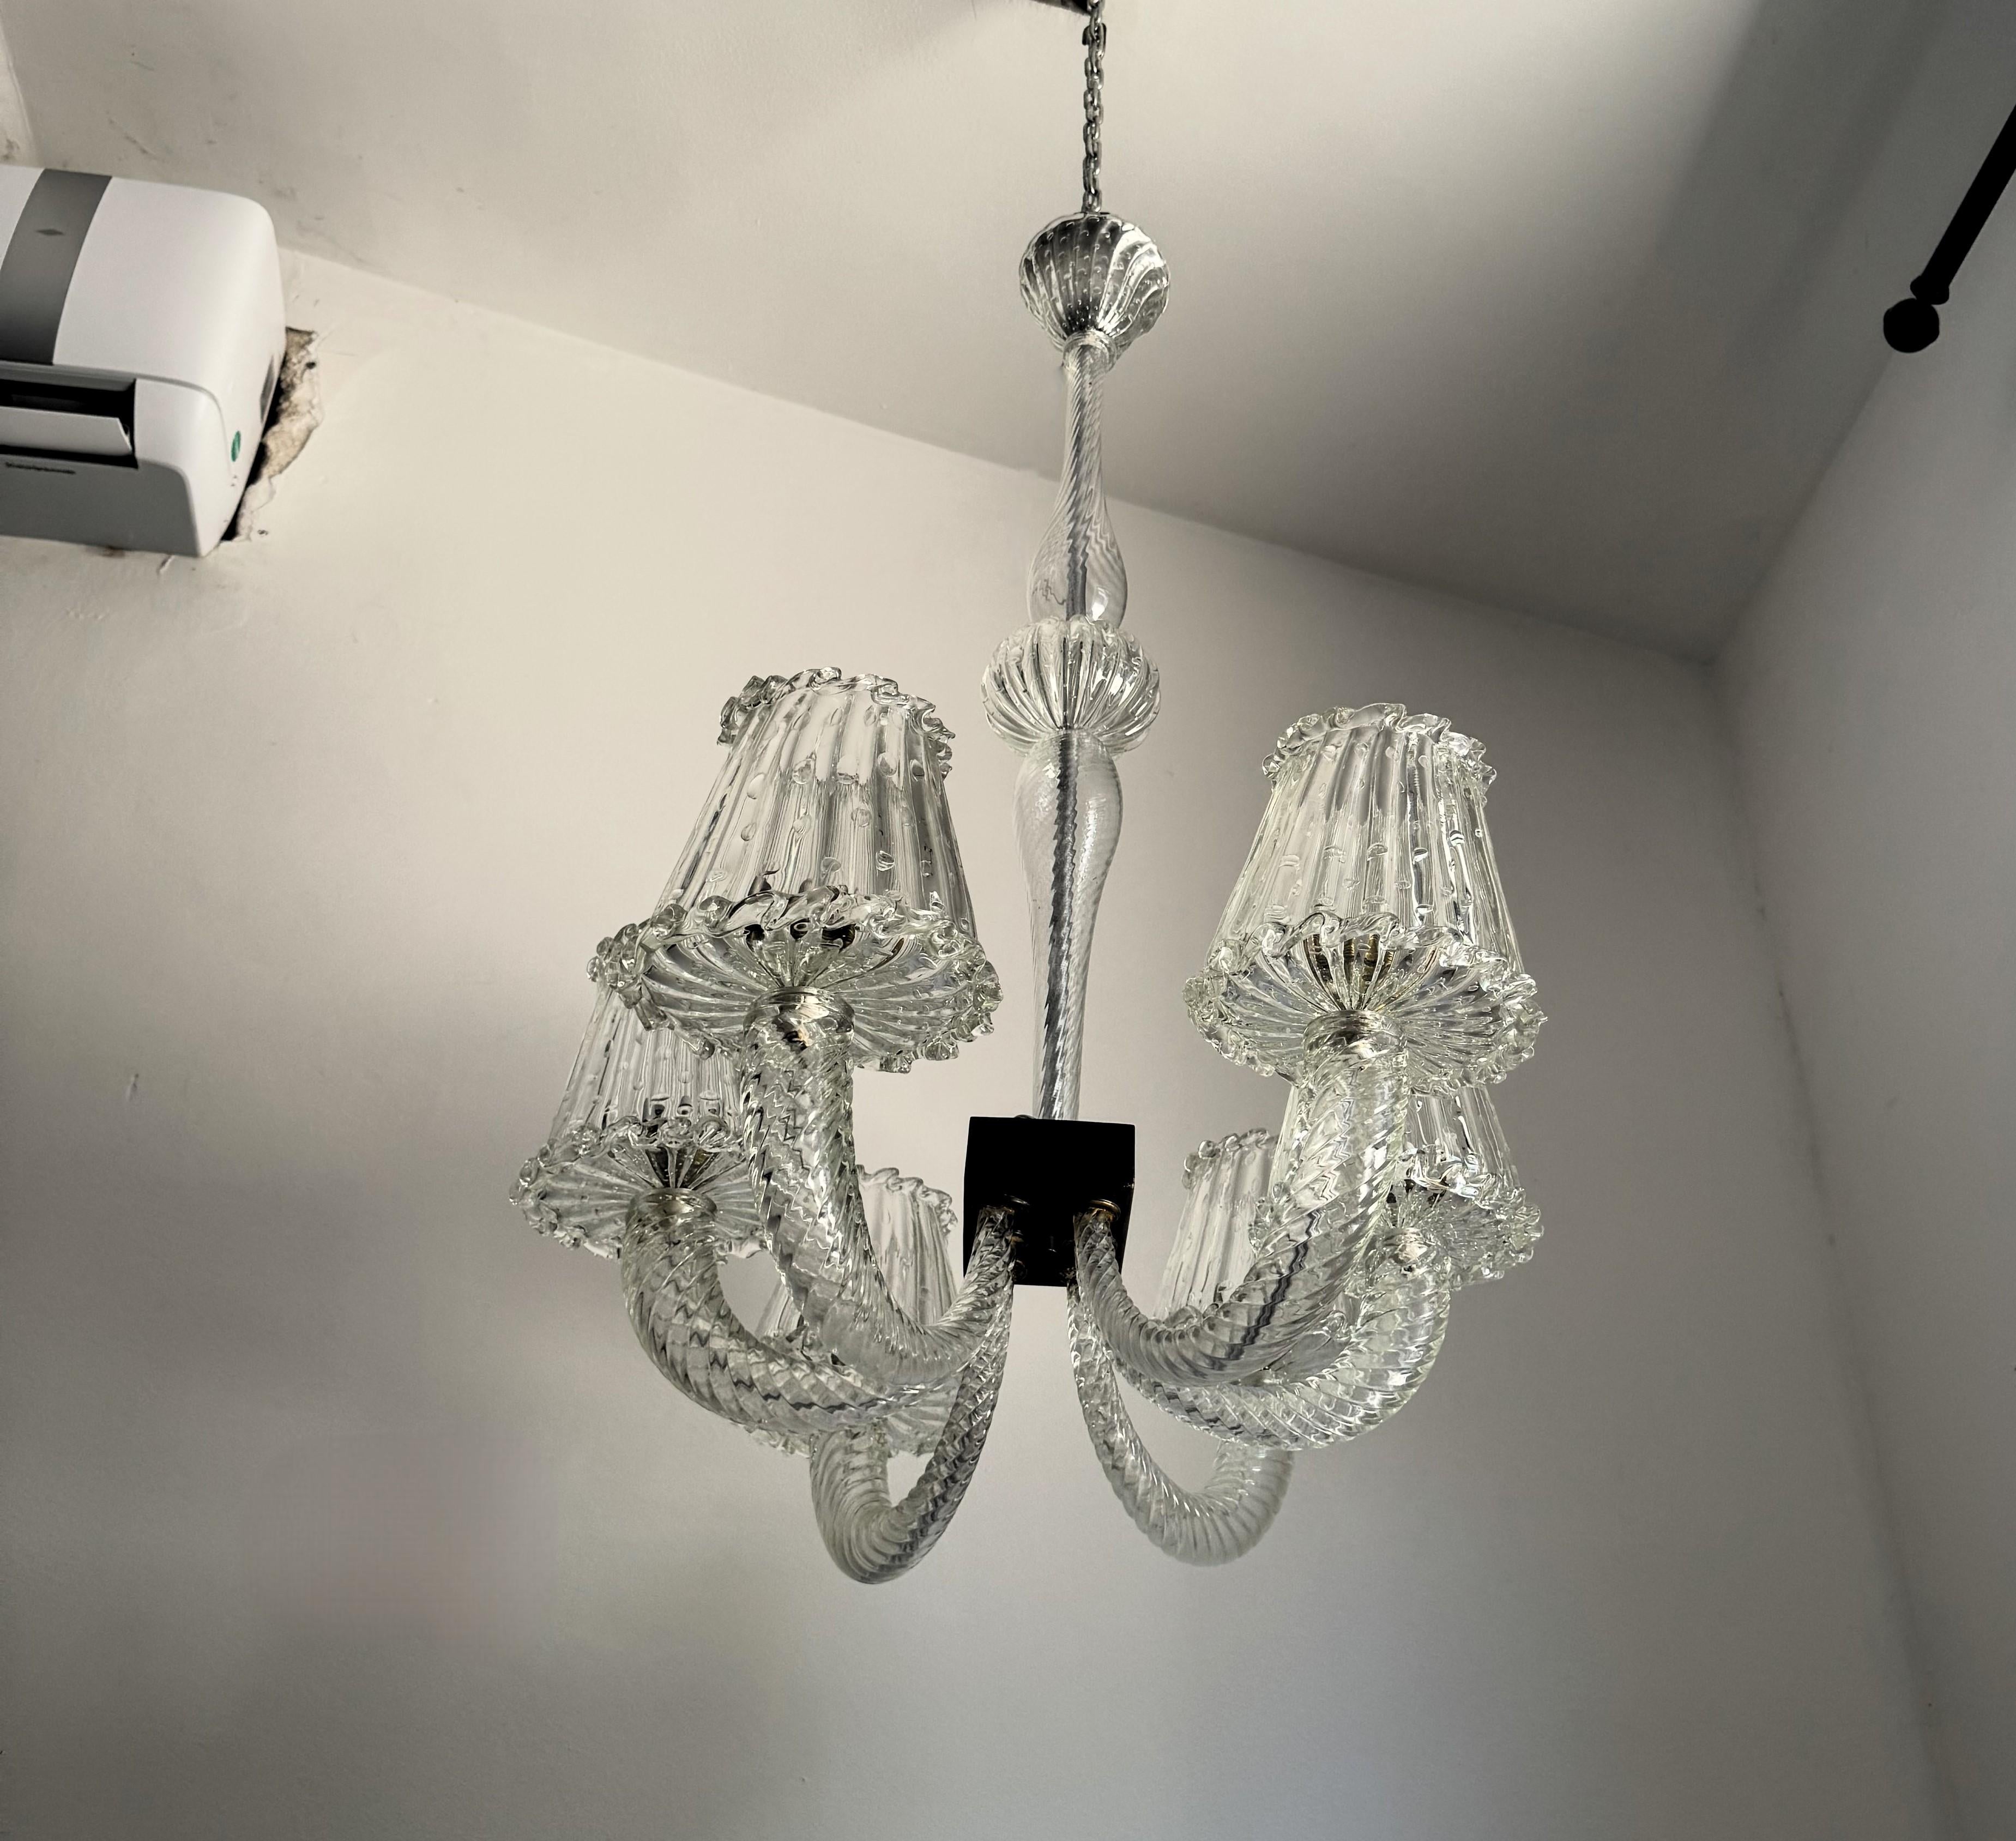 Art Deco Six Light Chandelier Attr. Barovier & Toso, Murano, Italy ca. 1930 For Sale 1